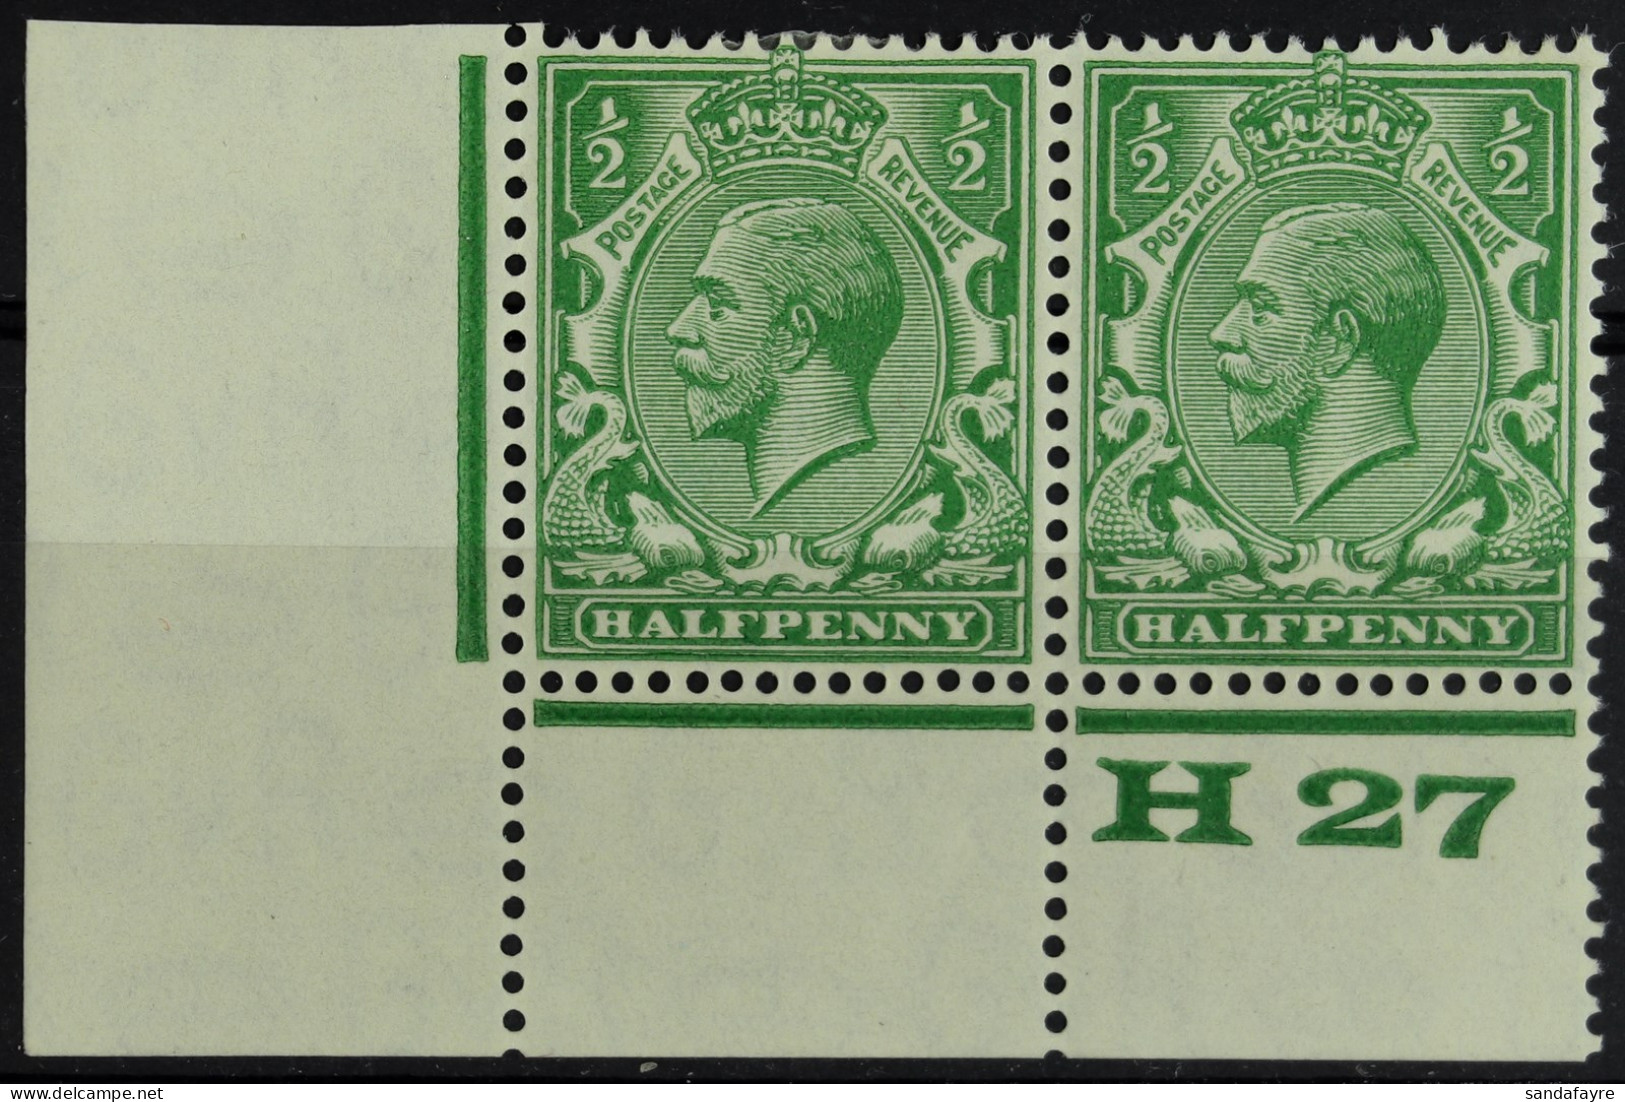 1924-26 ?d Green, SG 418, 'H27' Control Corner Pair, Perf. Type 3A, Fine Mint, The Control Stamp Is Never Hinged. Cat. ? - Unclassified